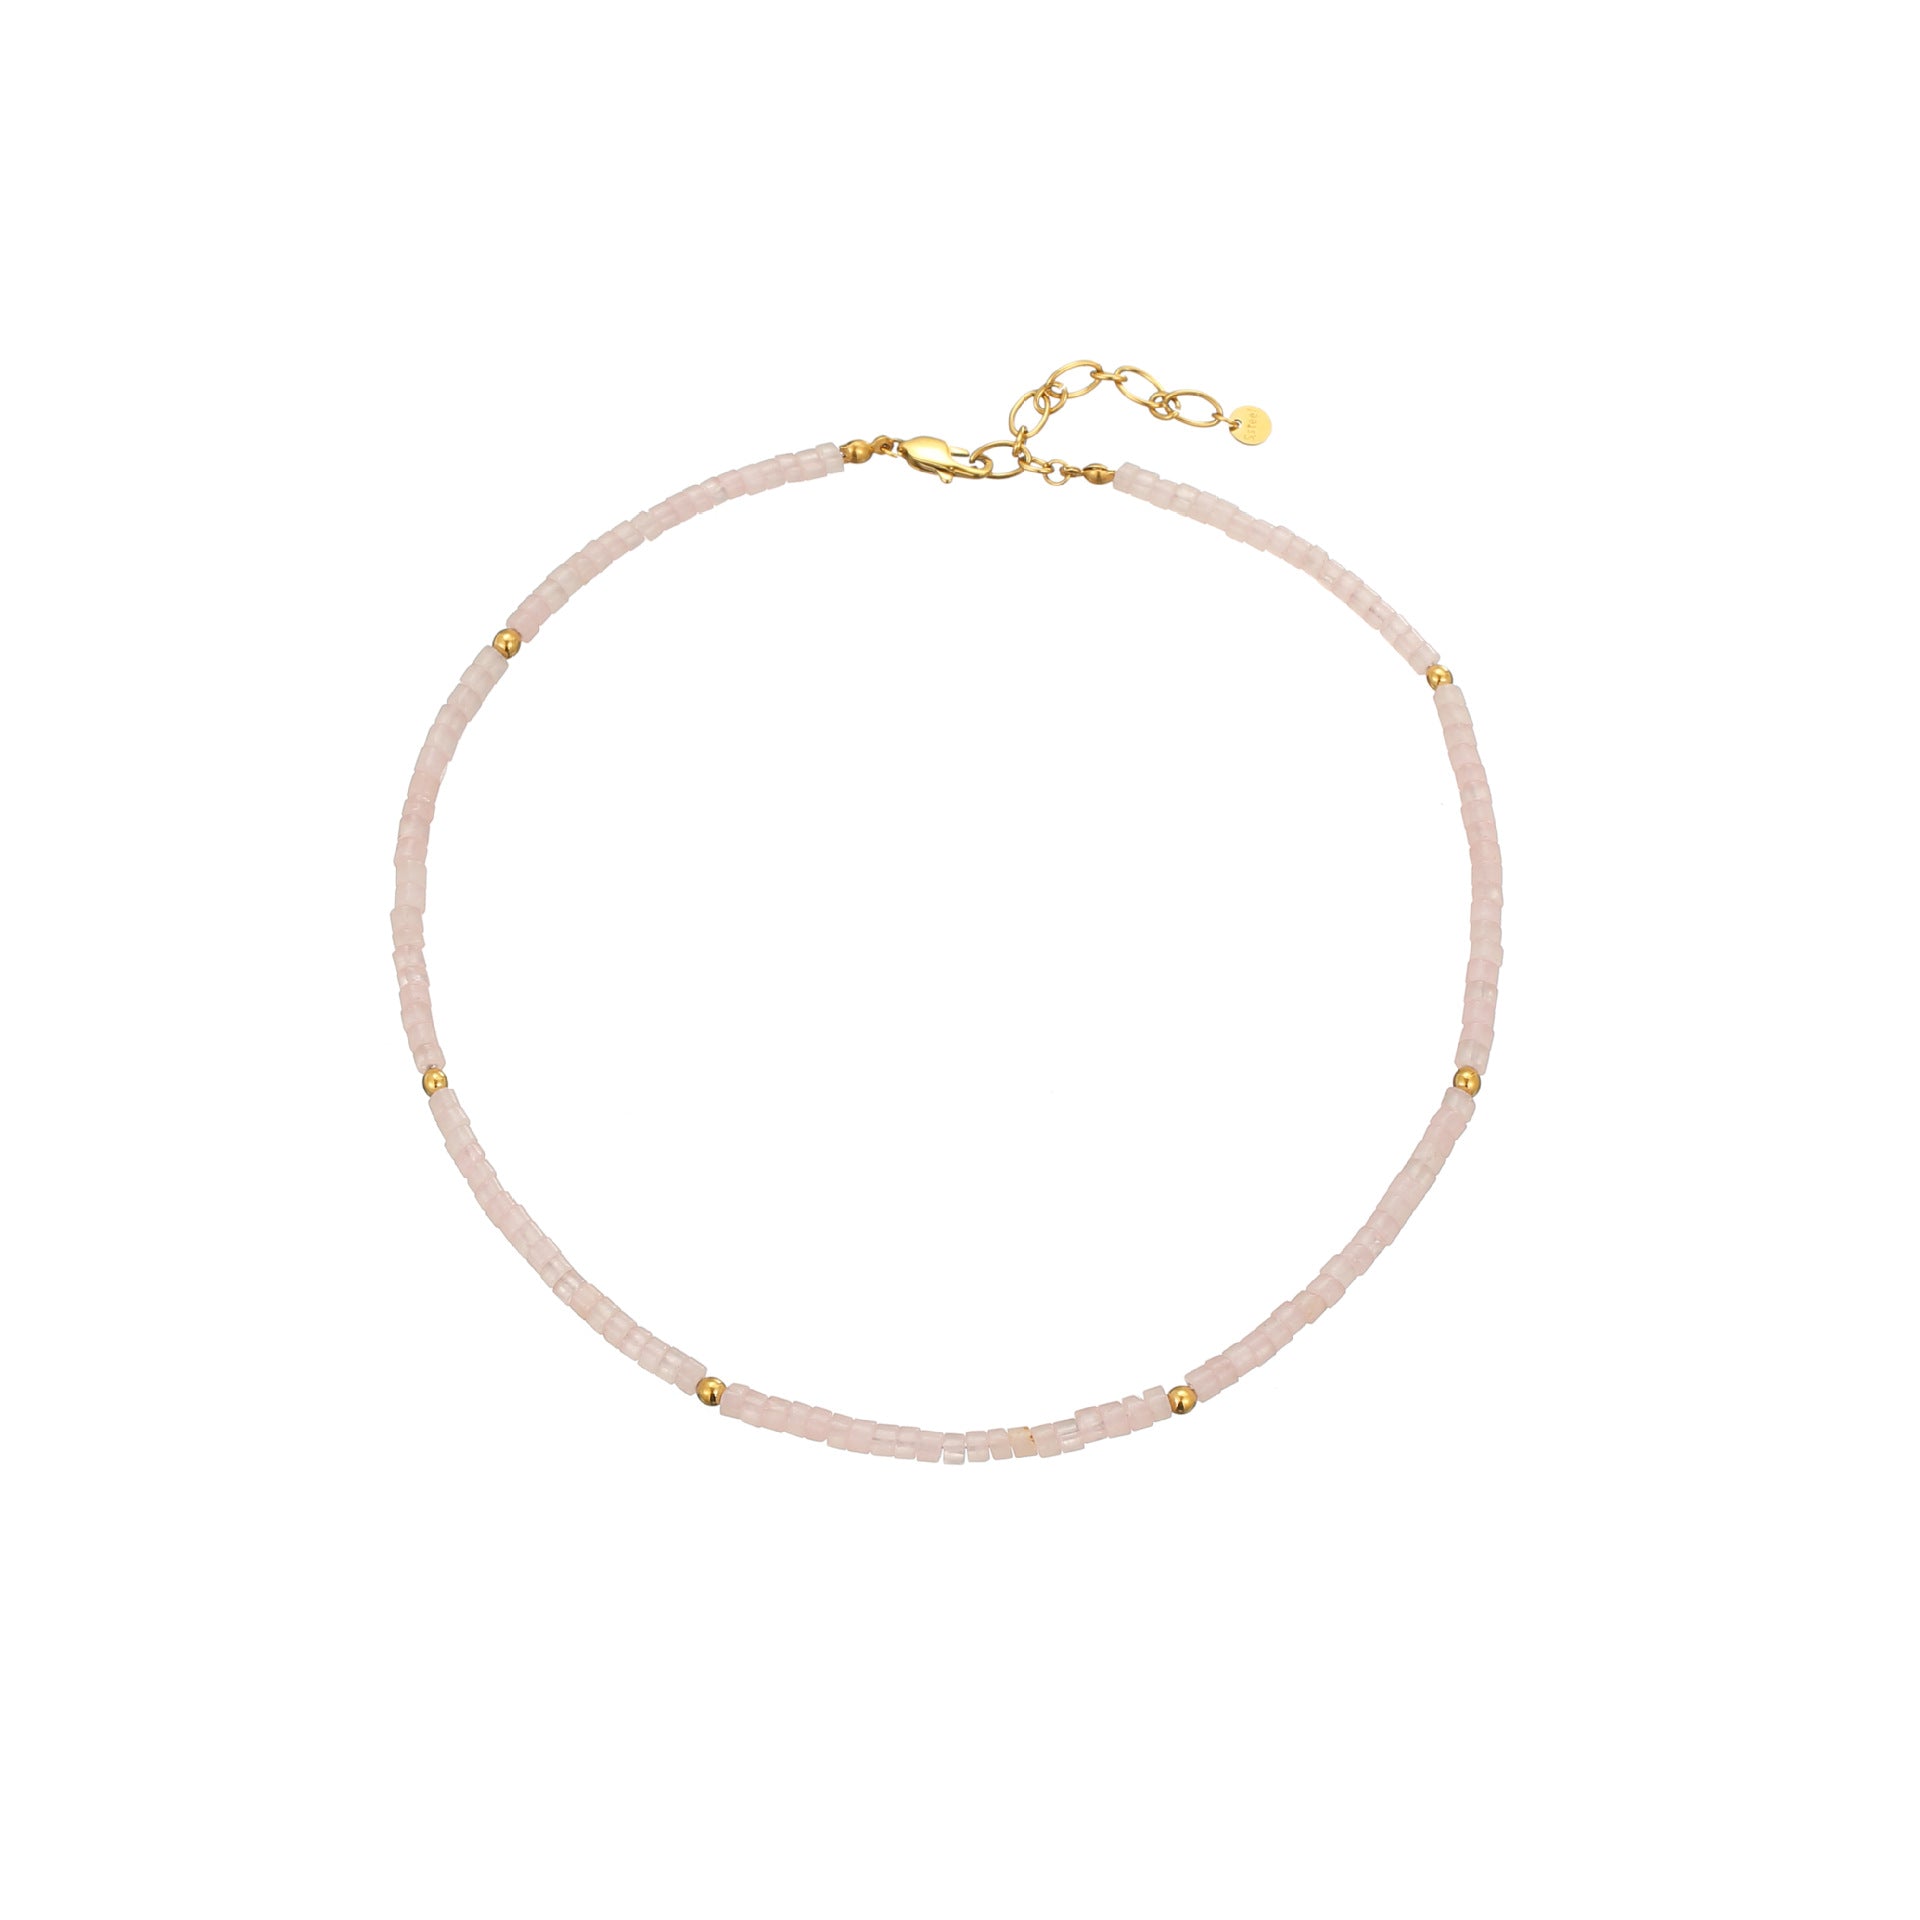 Minimalist Vintage-inspired Natural Stone Beaded Women's Necklace - Unique Design with a Touch of Elegance | UponBasics  UponBasics Pink  